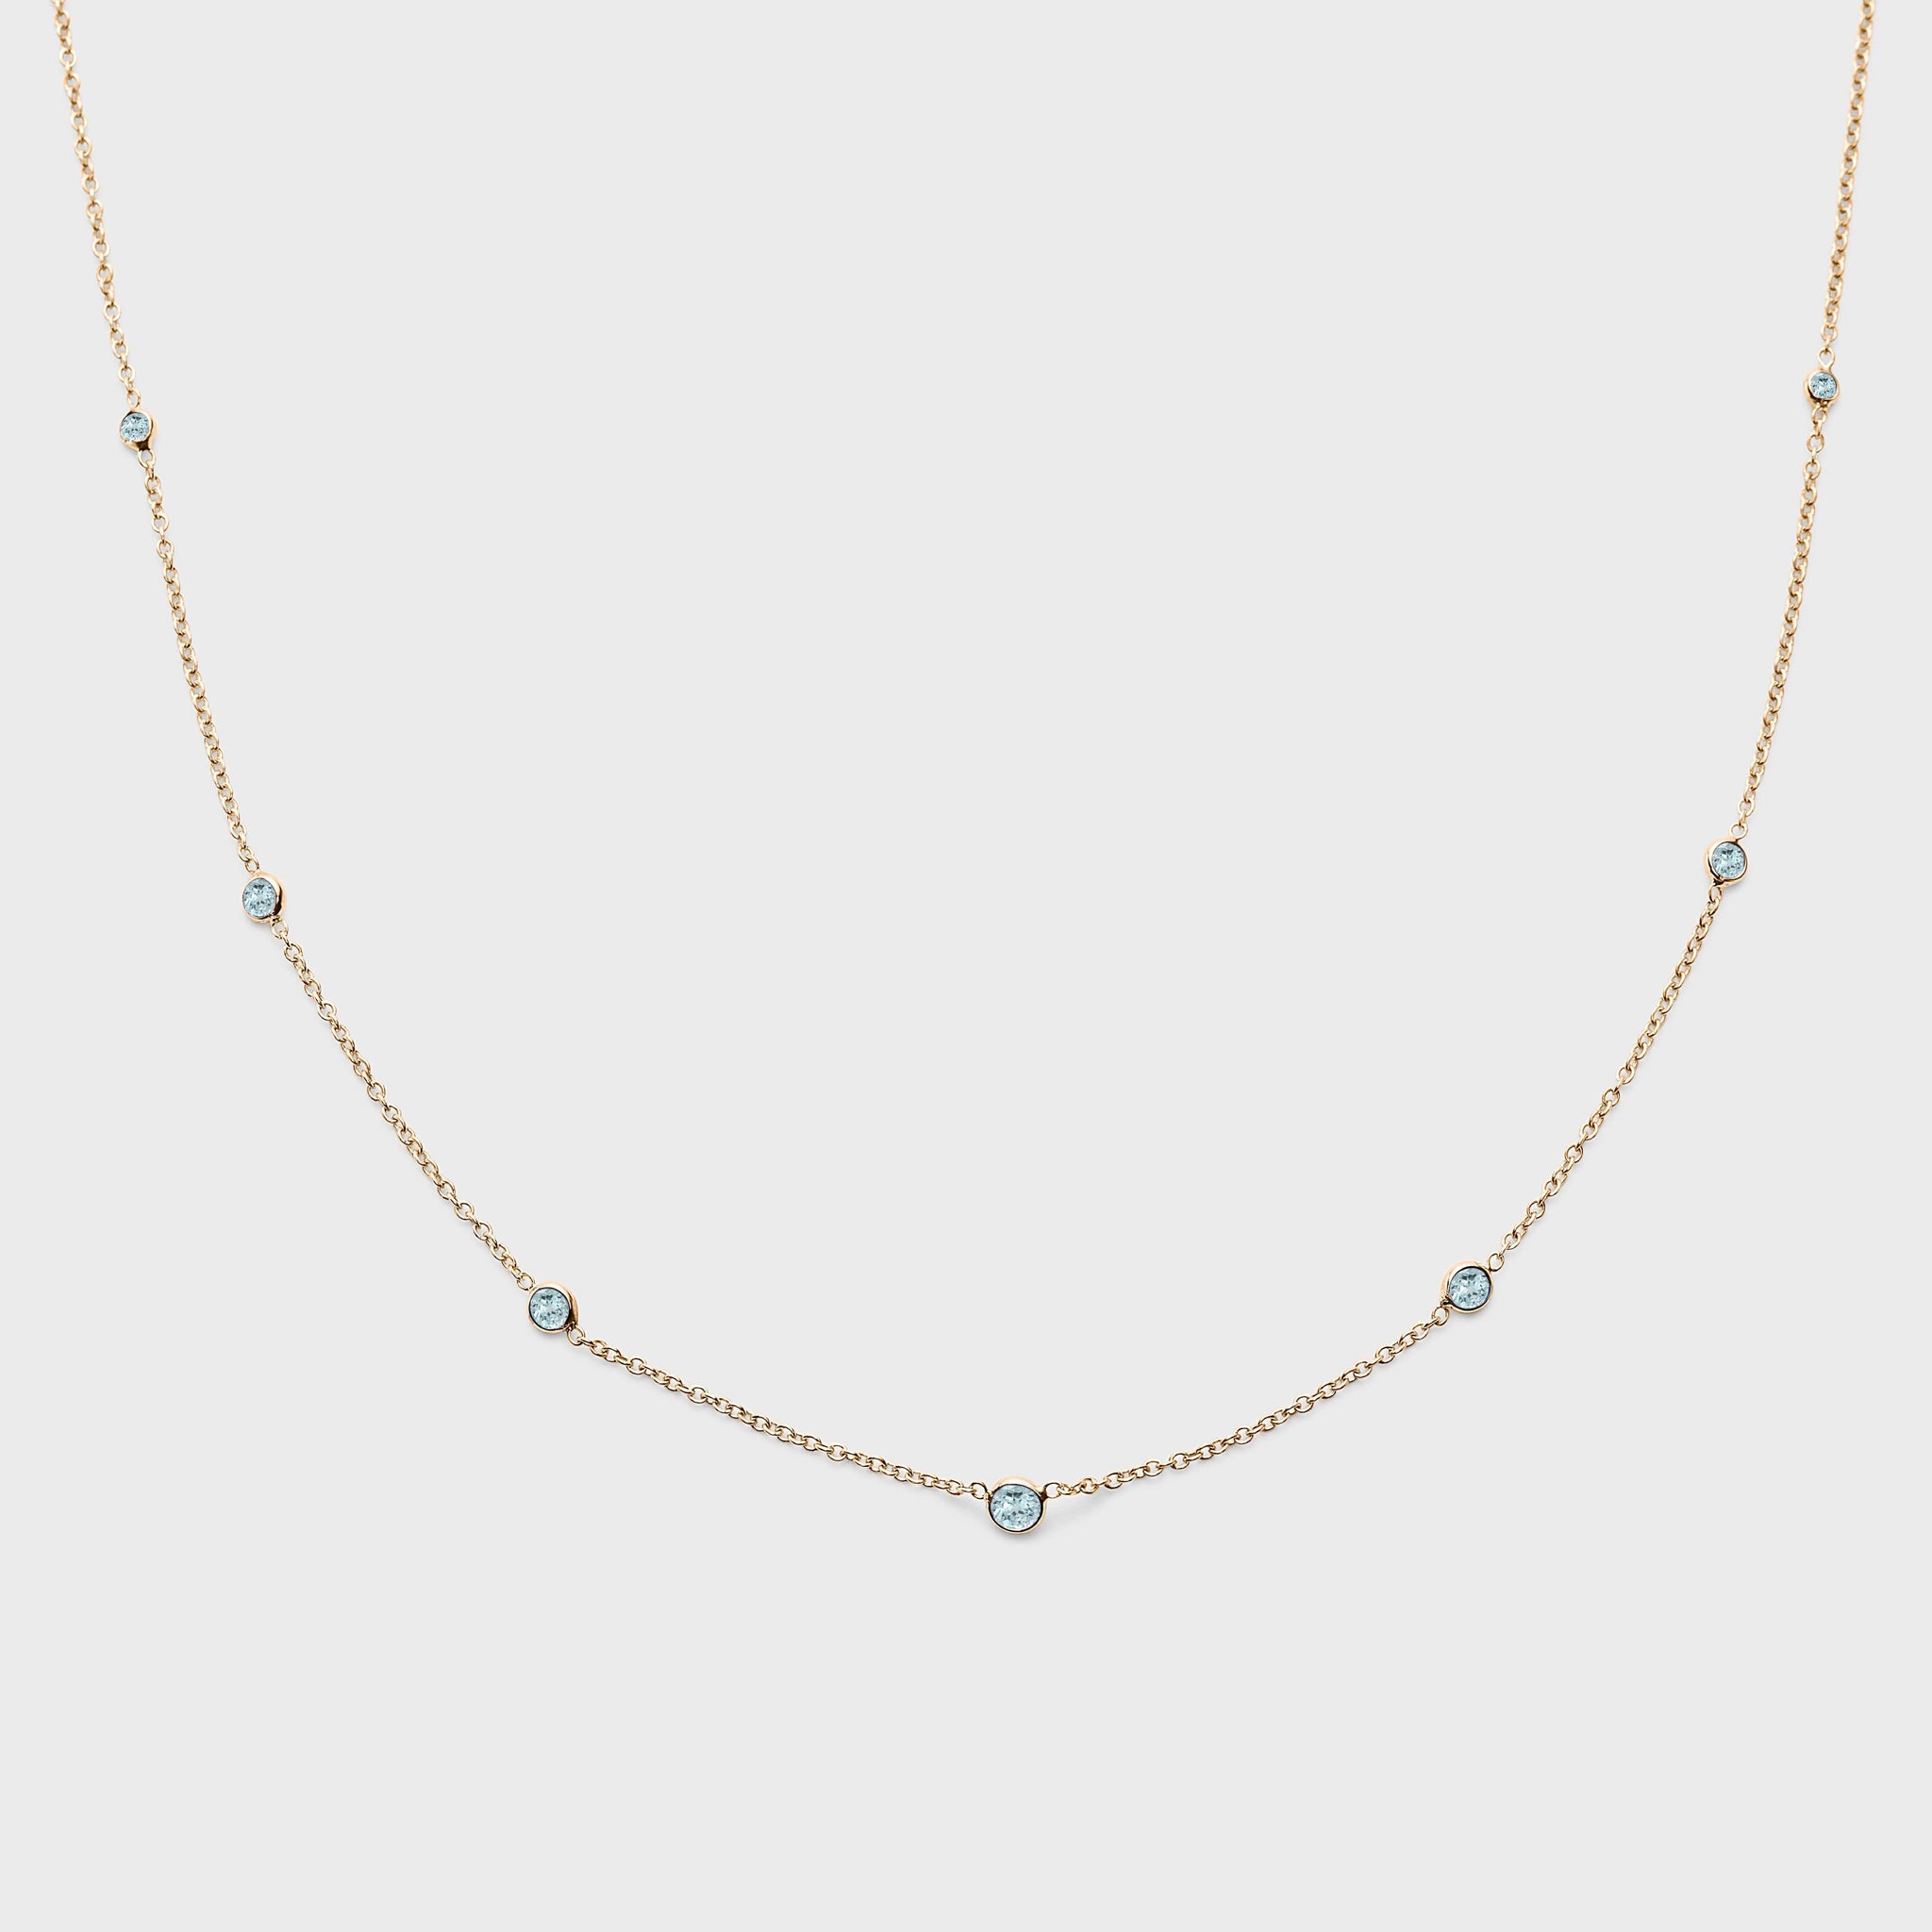 Aquamarine Station Necklace 3 Mm Round by the Yard Set in 14k White Gold...  - Etsy